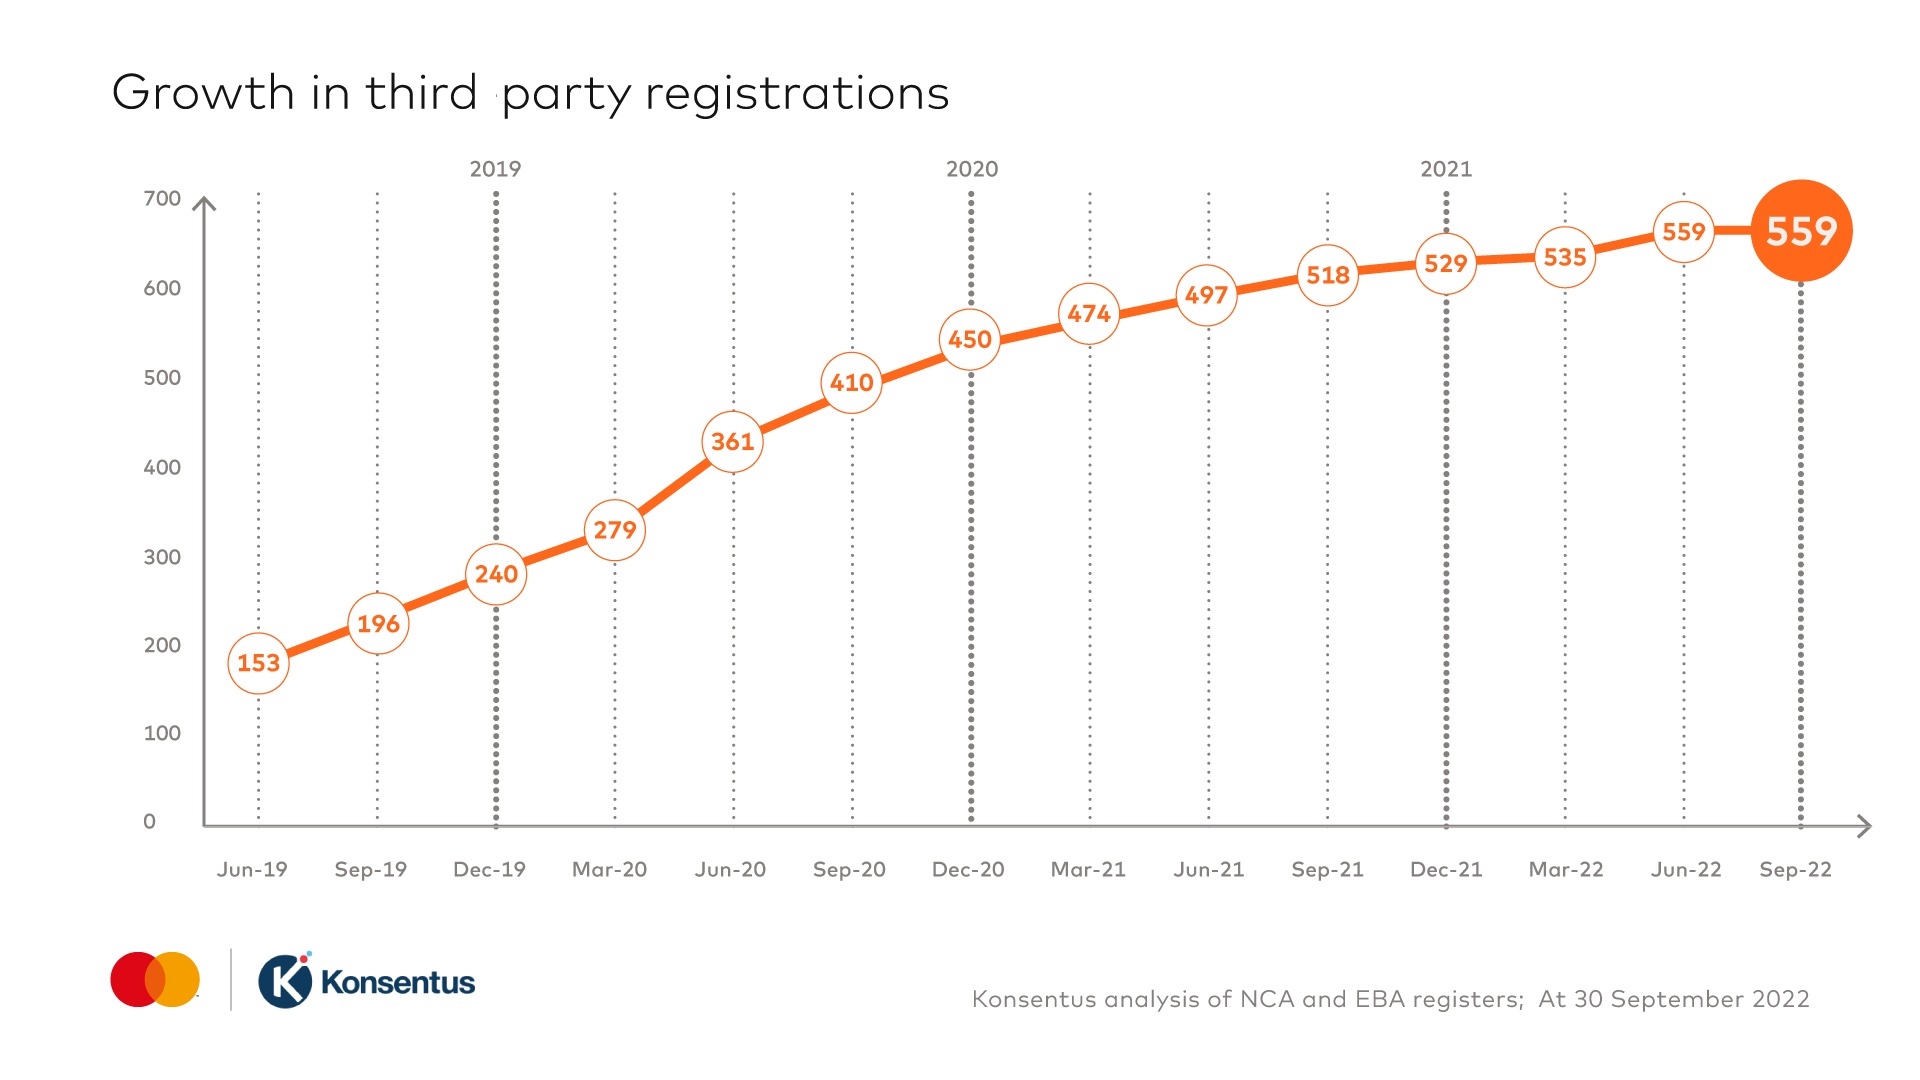 Third party registrations